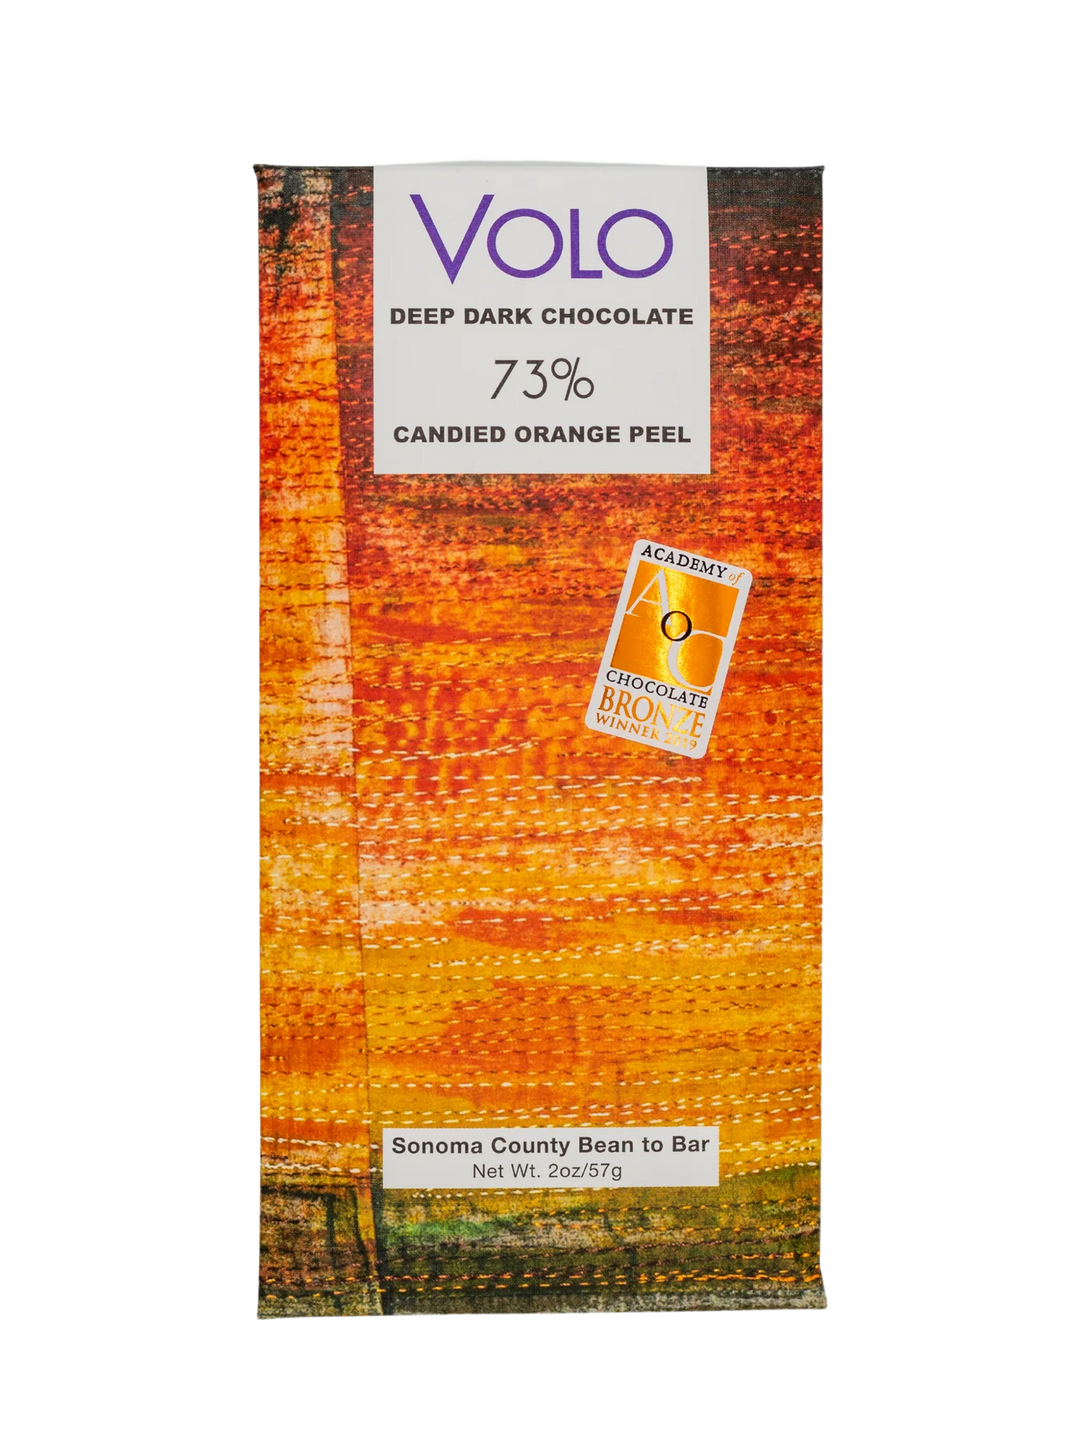 Image of the front of Volo 73% Dark Chocolate with Candied Orange Peel